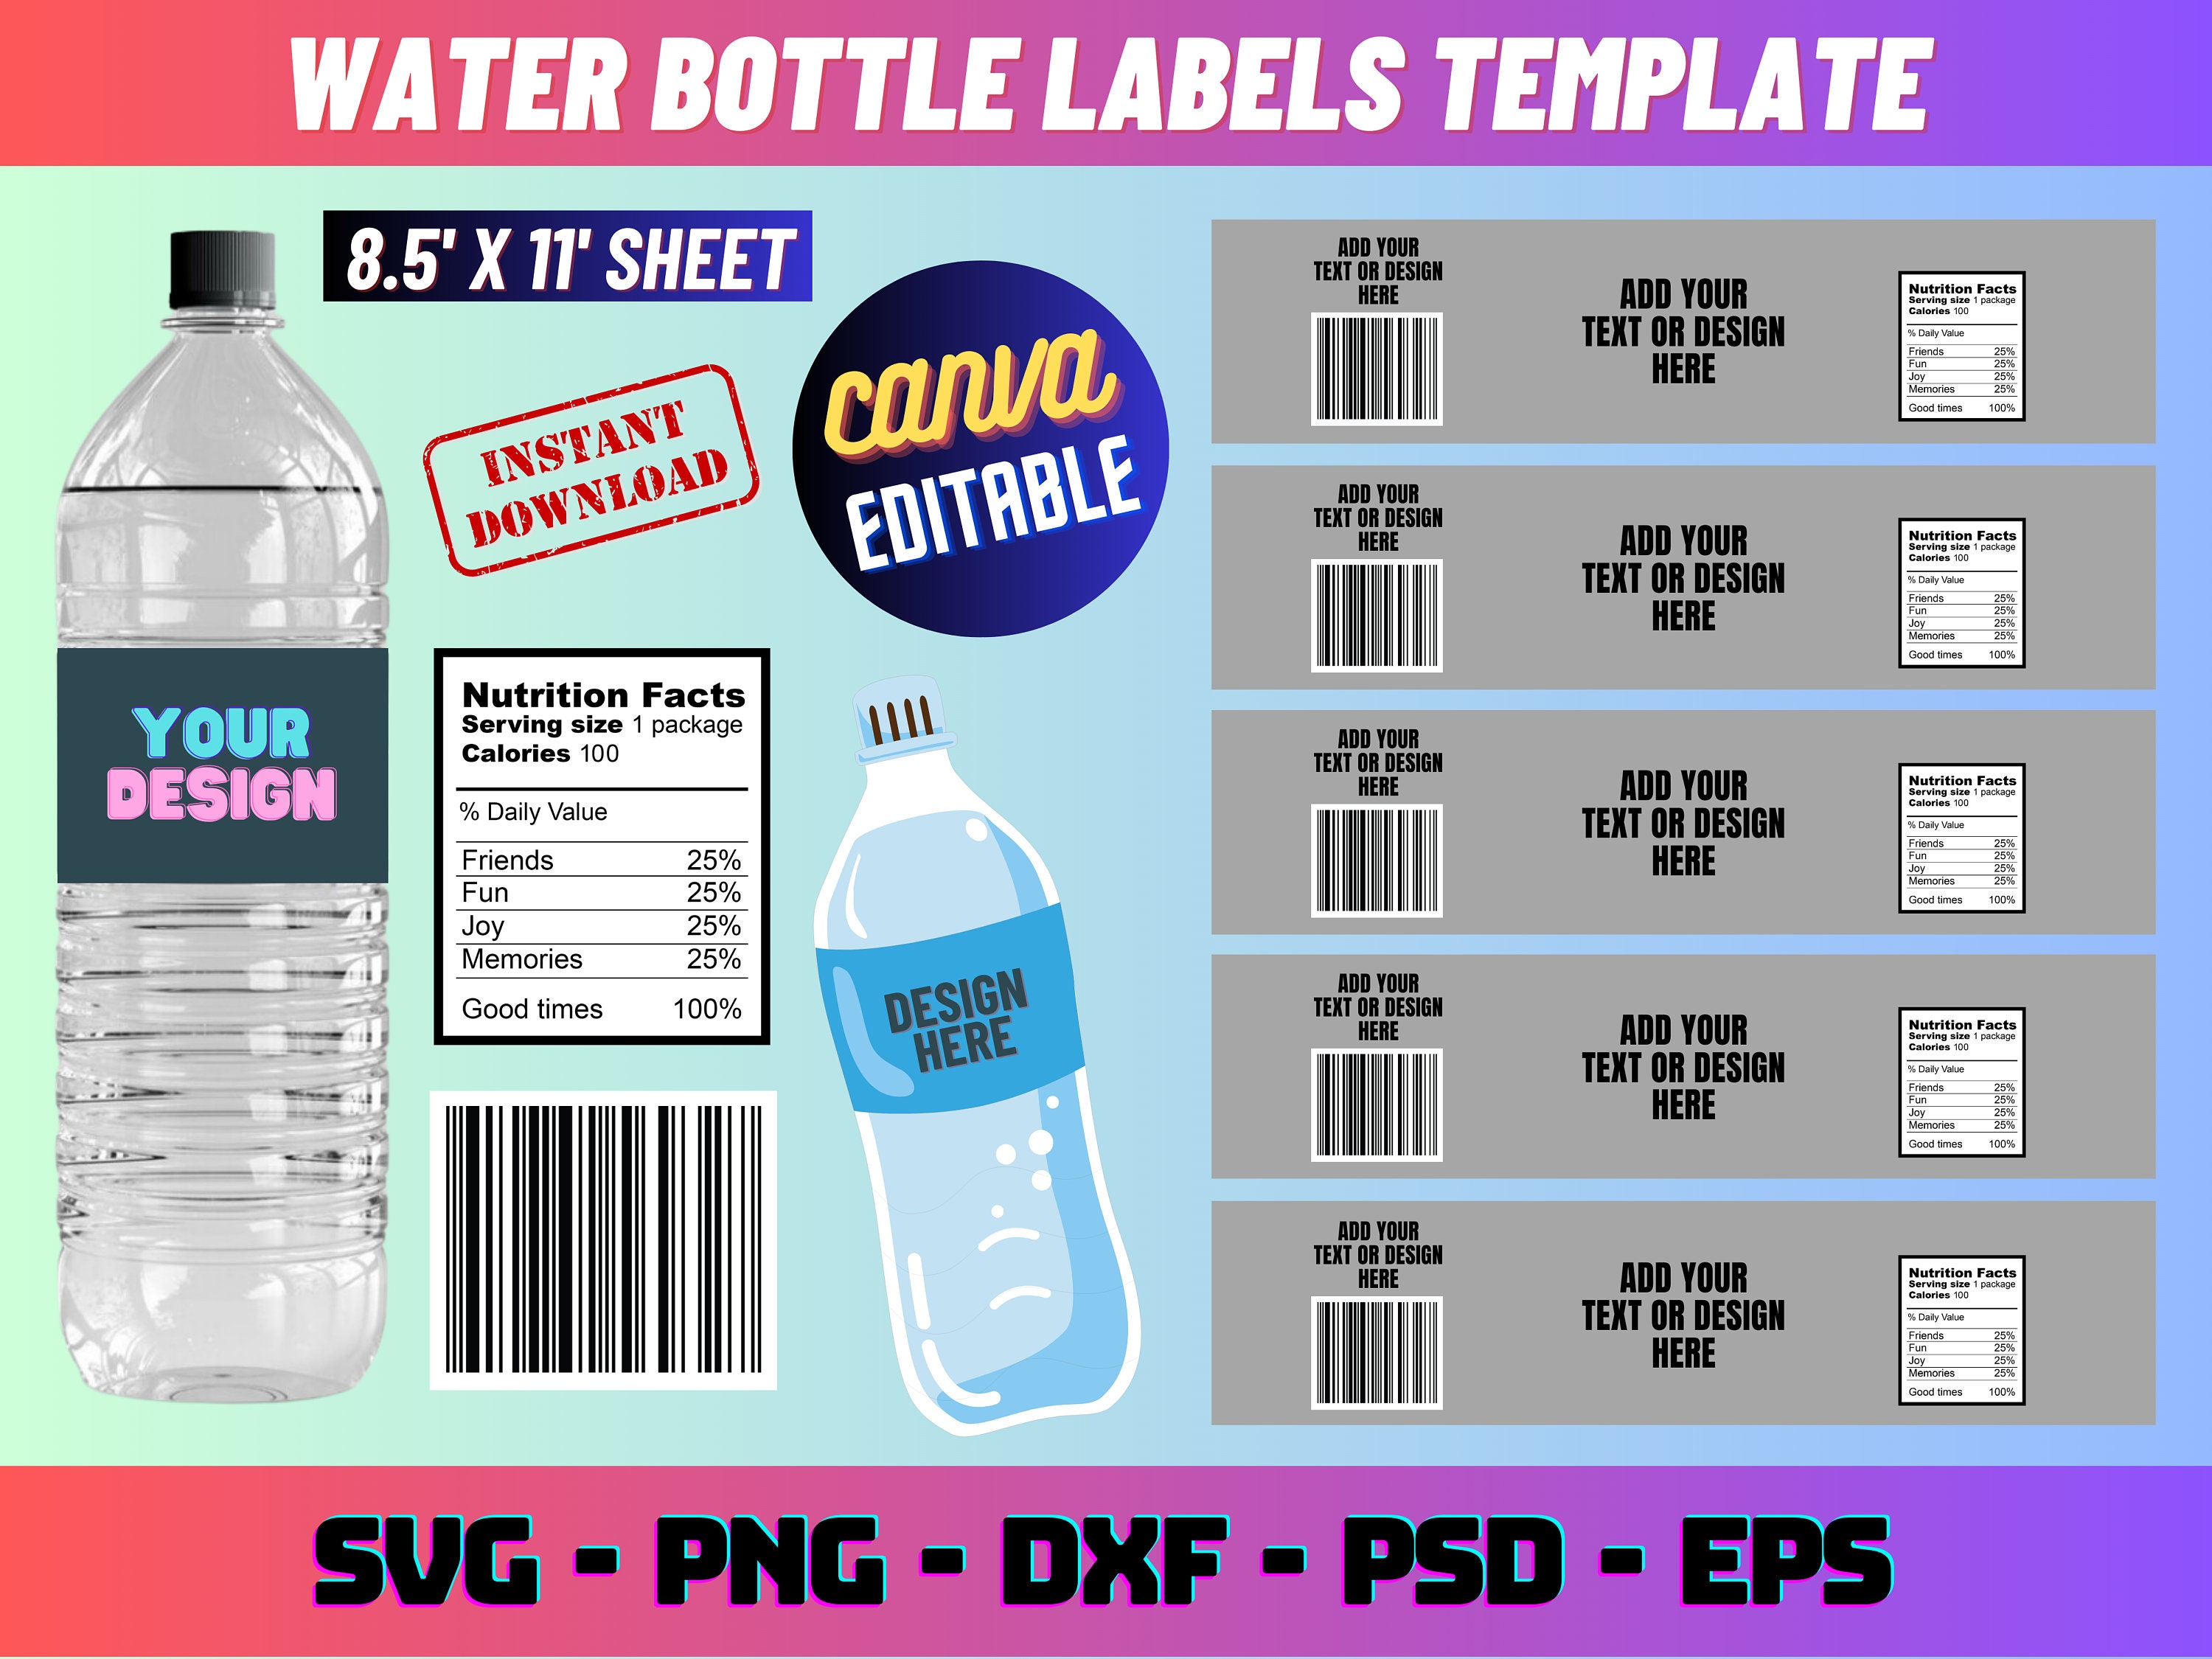 It's a Boy Water Bottle Labels for Baby Shower - Choose One of 3 Designs by  PaintTheD…